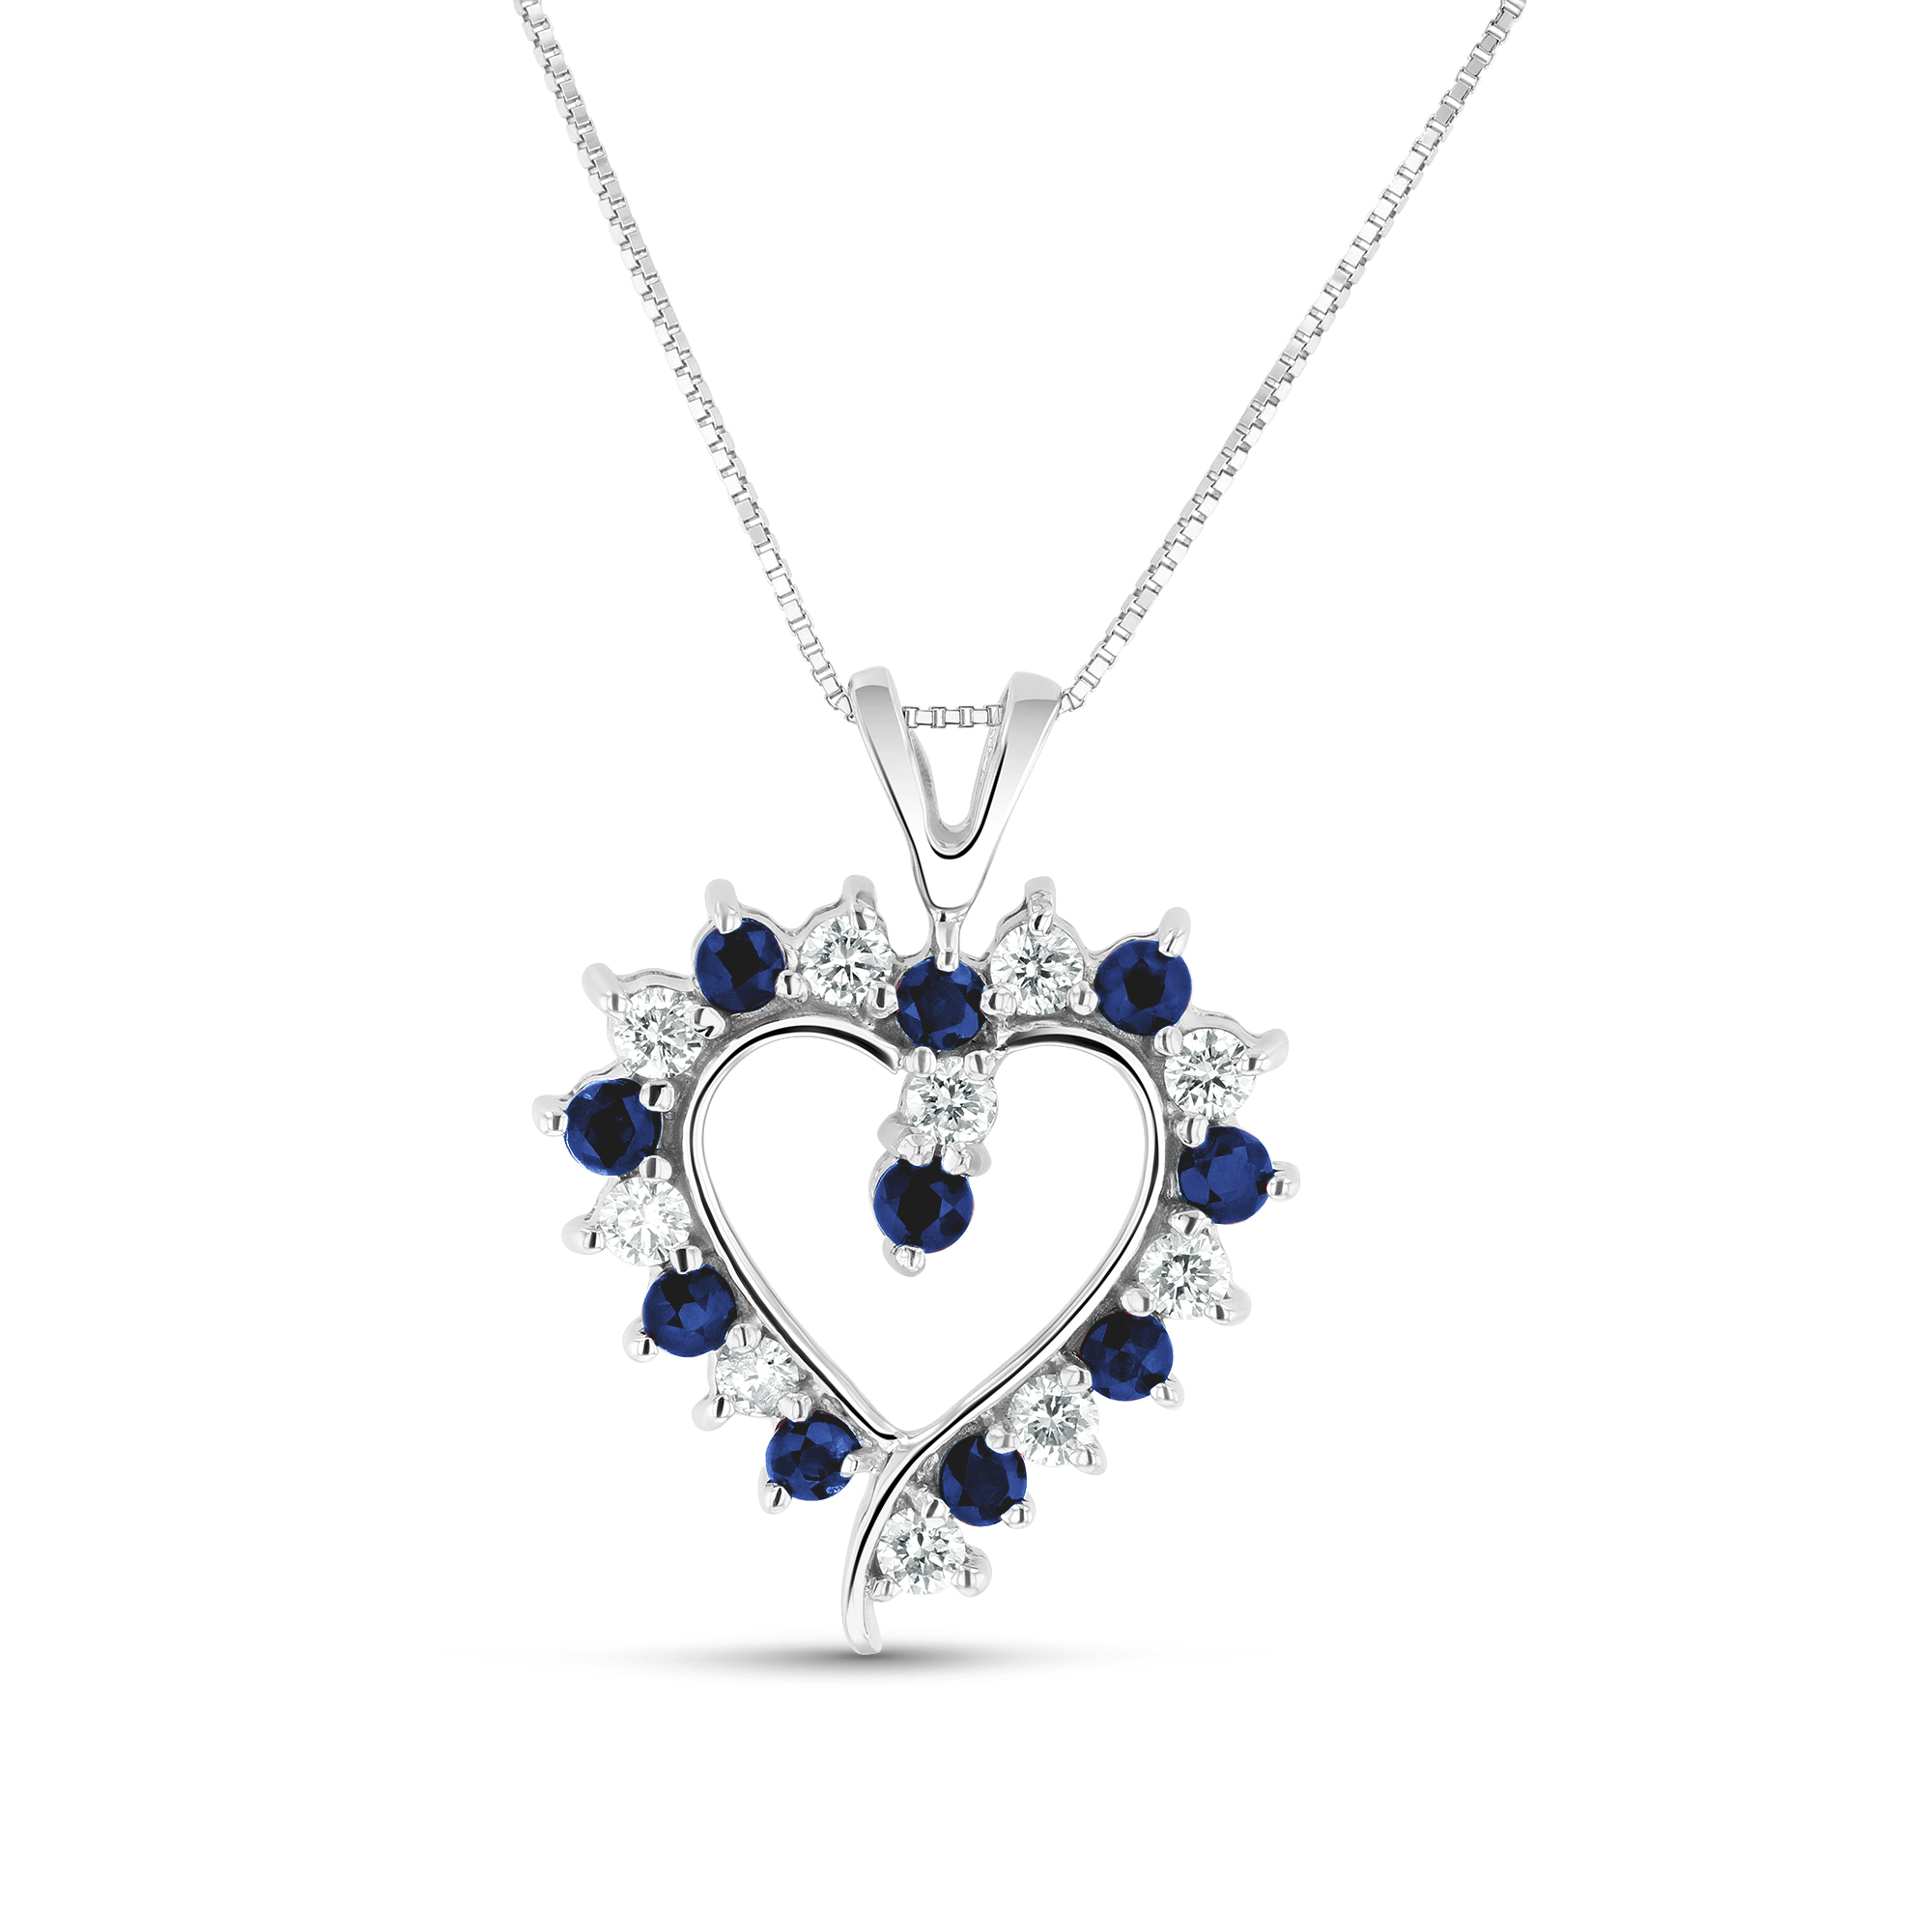 View 0.88ctw Diamond and Sapphire Heart Shaped Pendant in 14k White Gold